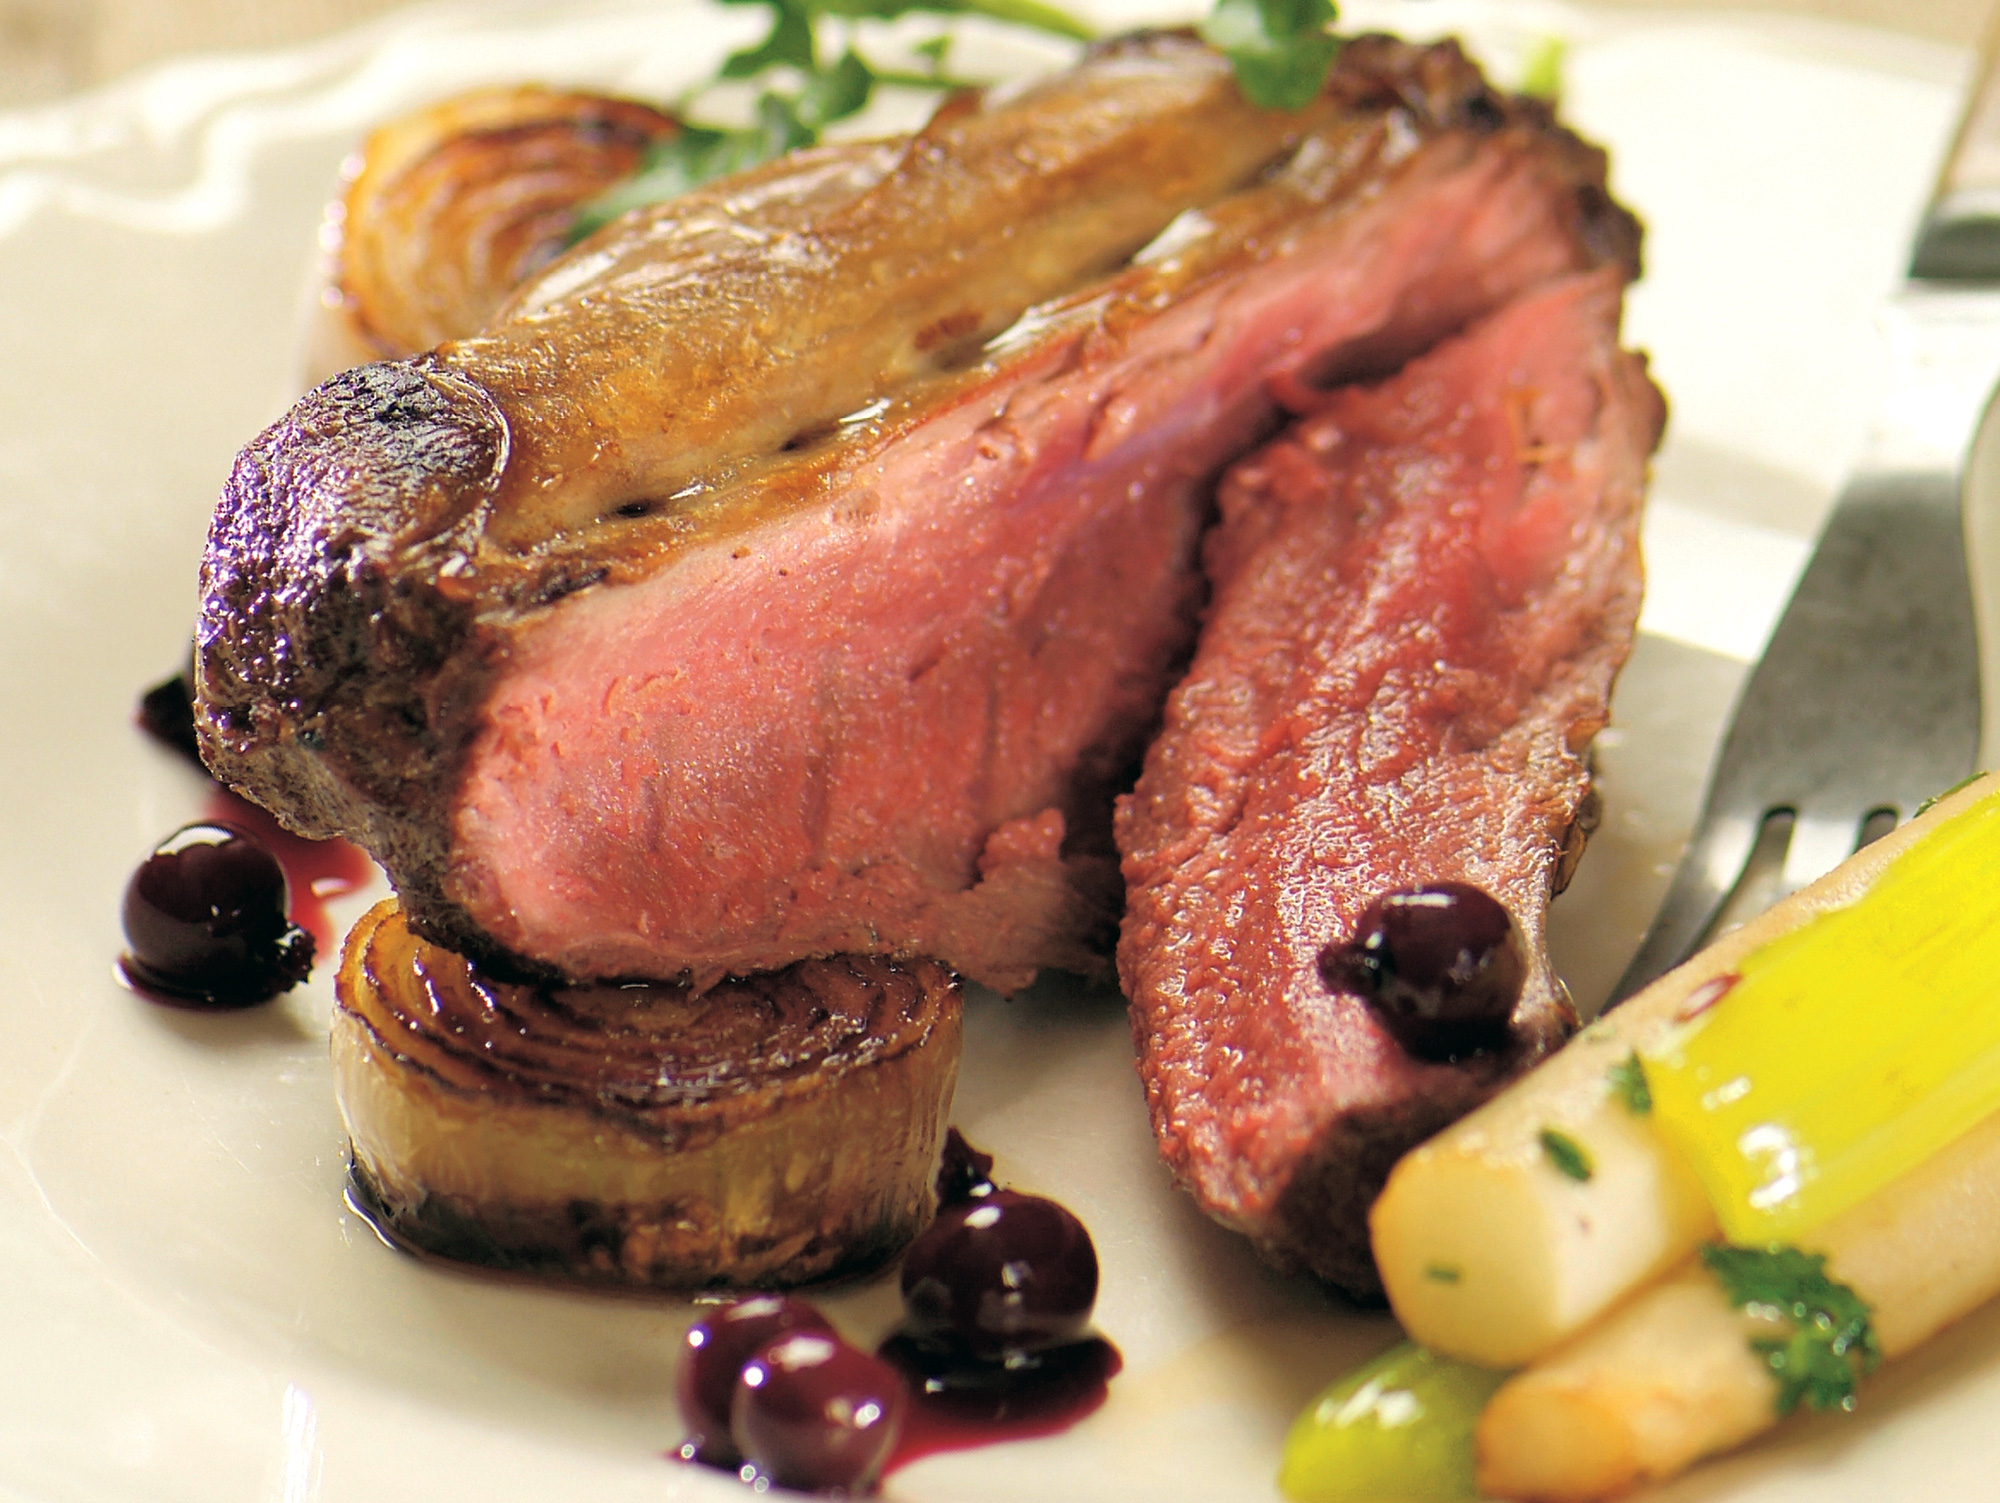 Blackcurrant wine marinade tenderizes and flavors while hare (rabbit).